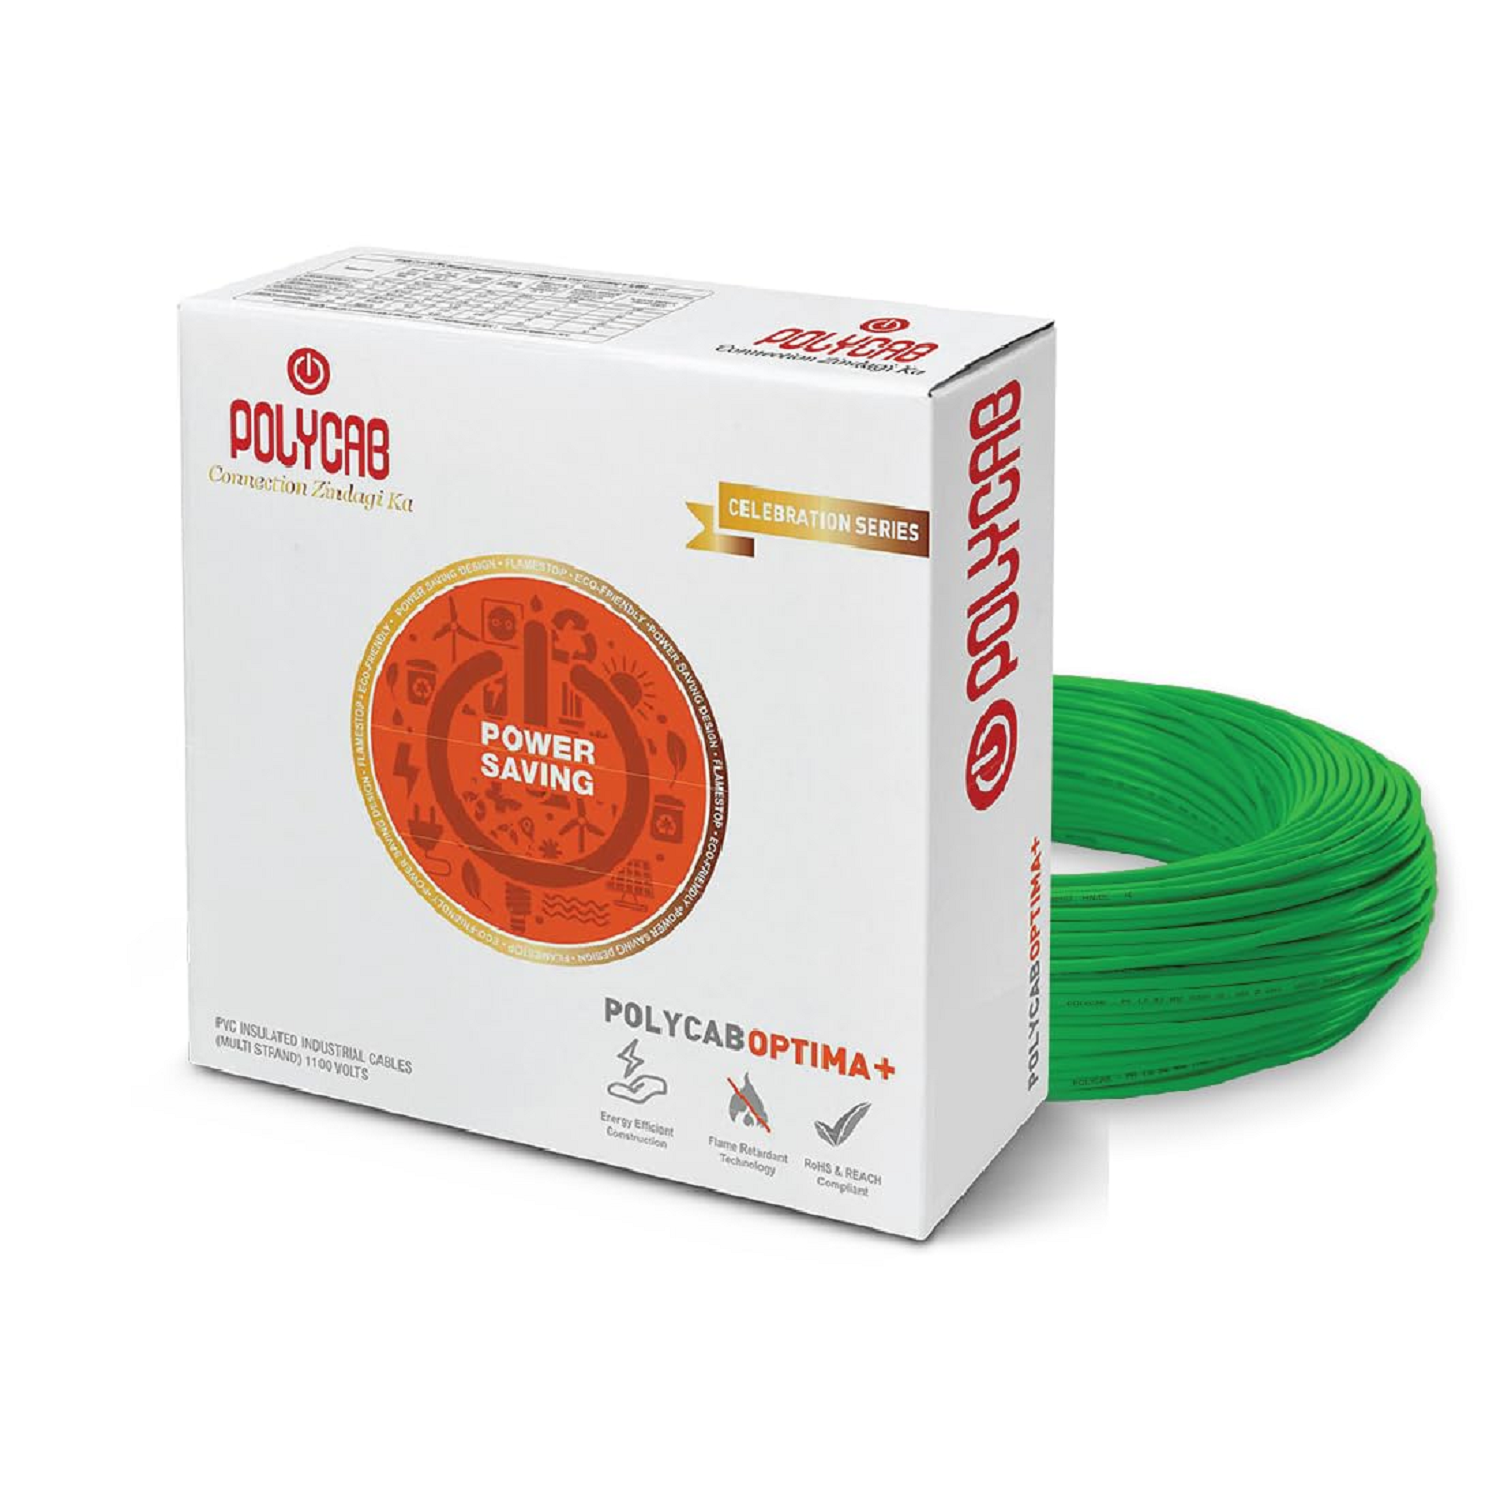 Polycab Optima Plus FR-LF 1.5 SQ-MM, 90 Meters PVC Insulated Copper Wire Single Core (Green)